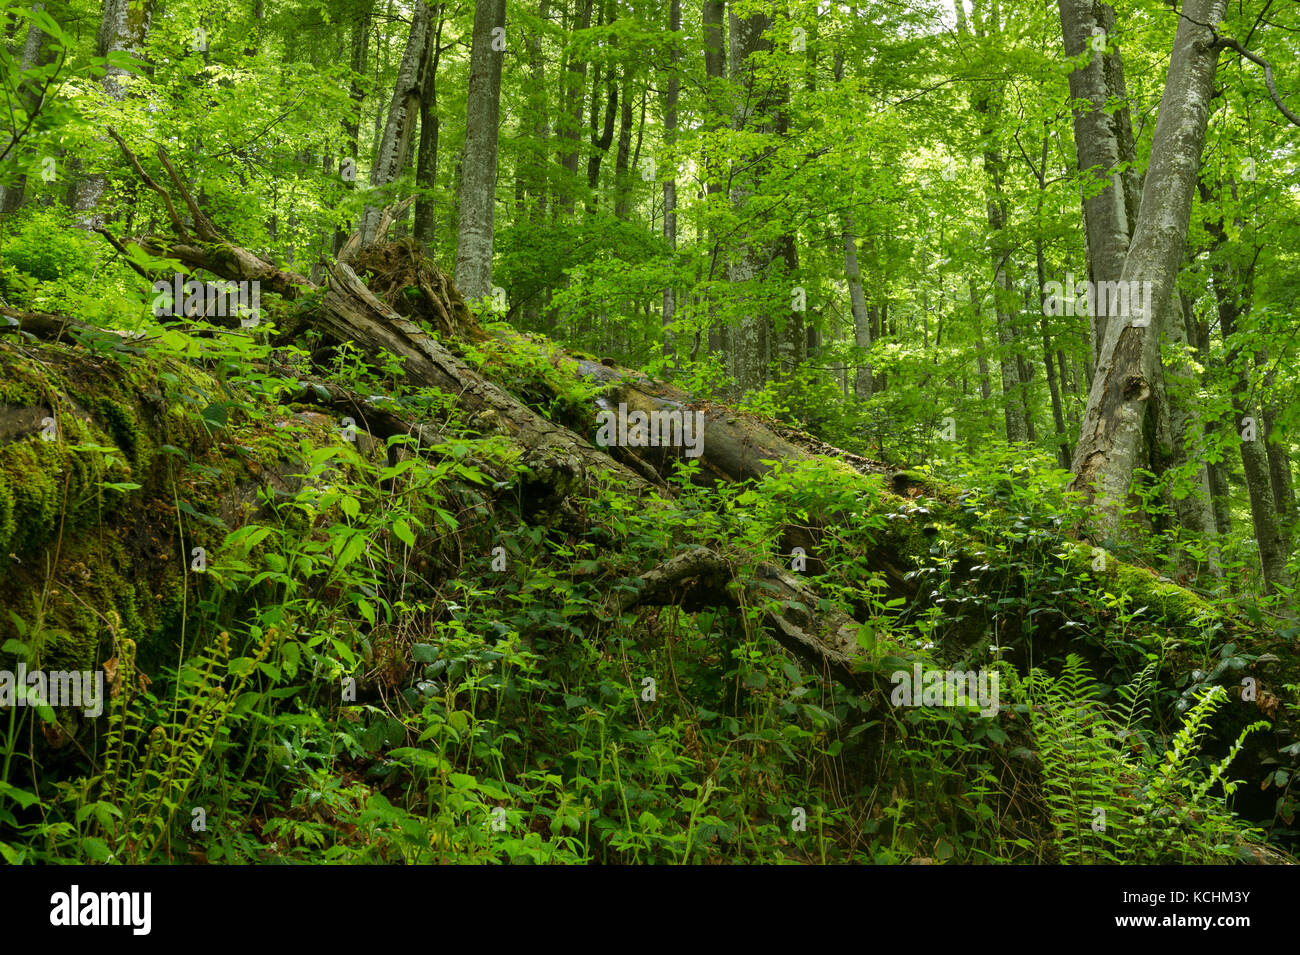 Domogled -Valea Cernei National Park / Romania: High biodiversity and climate value primary (beech) forest in the UNESCO World Nature Heritage site. Stock Photo